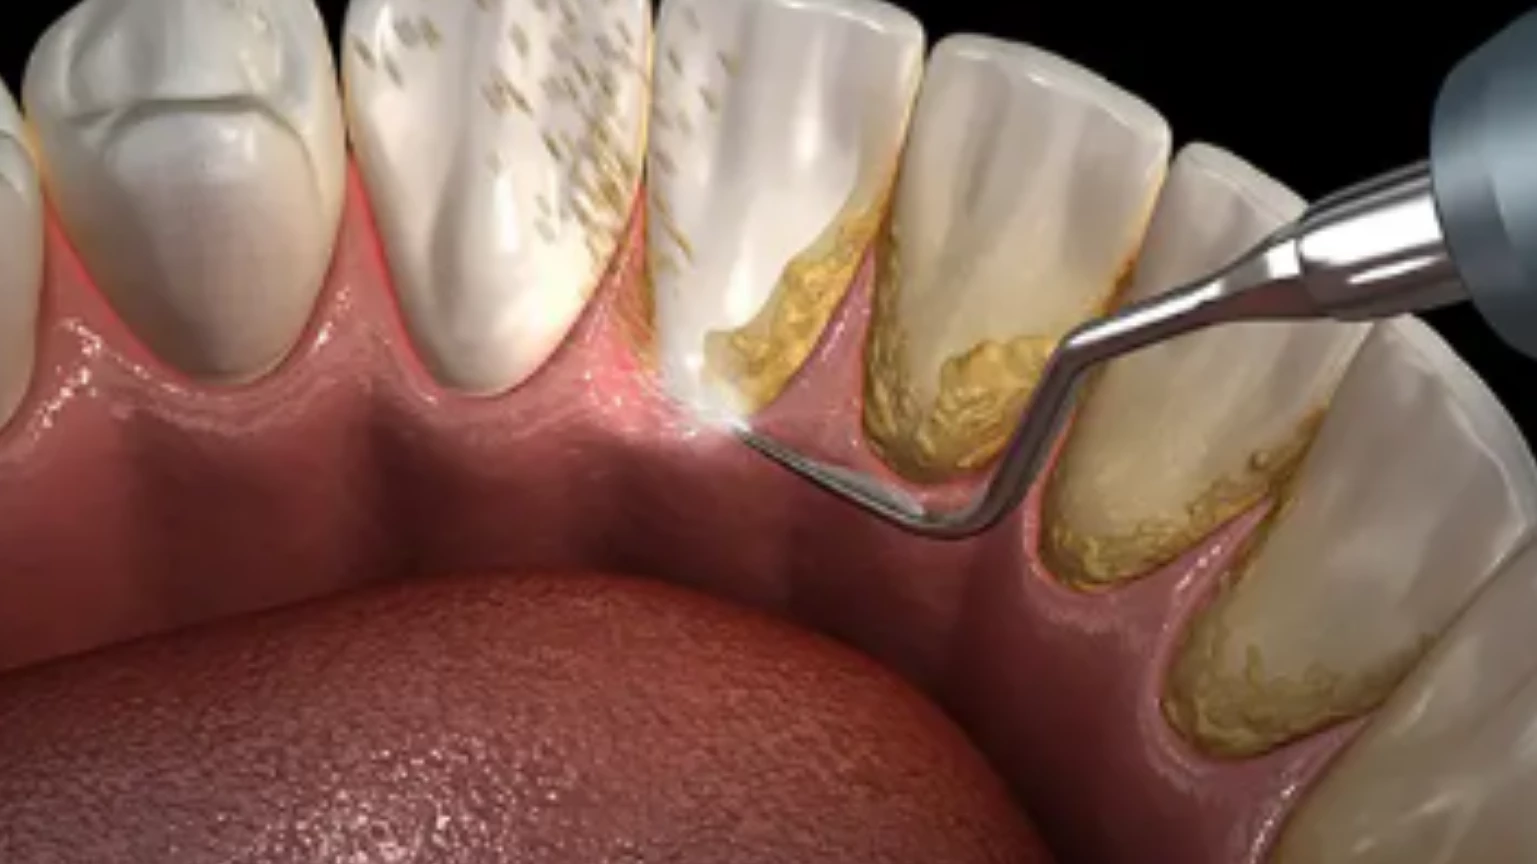 combat swollen gums tailored periodontal treatments for gum health